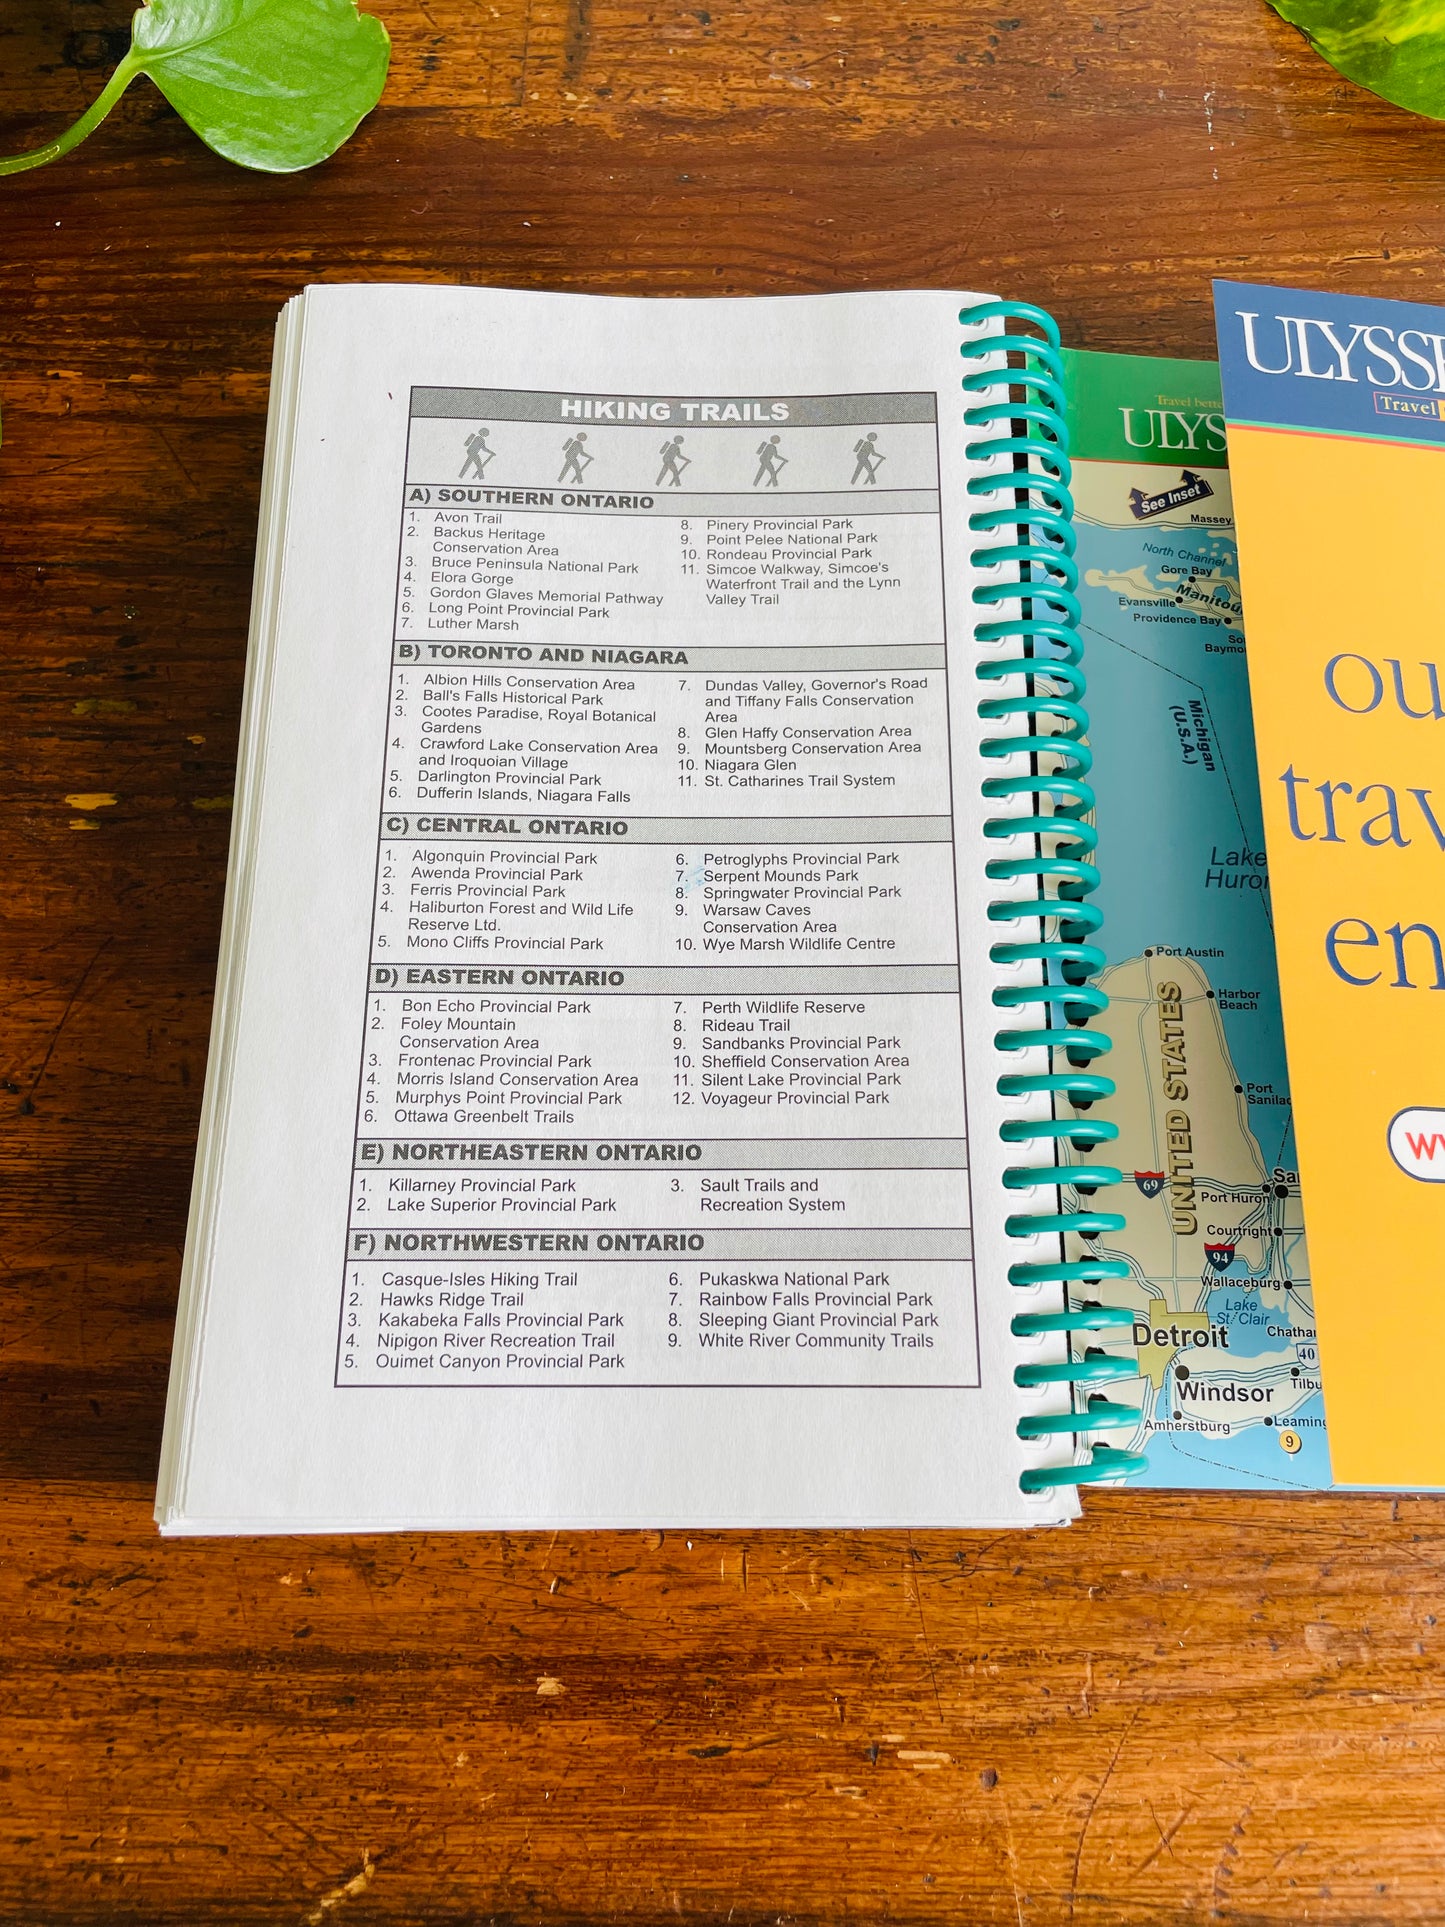 Ulysses Hiking in Ontario Spiral-Bound Guidebook by Tracey Arial (2001)